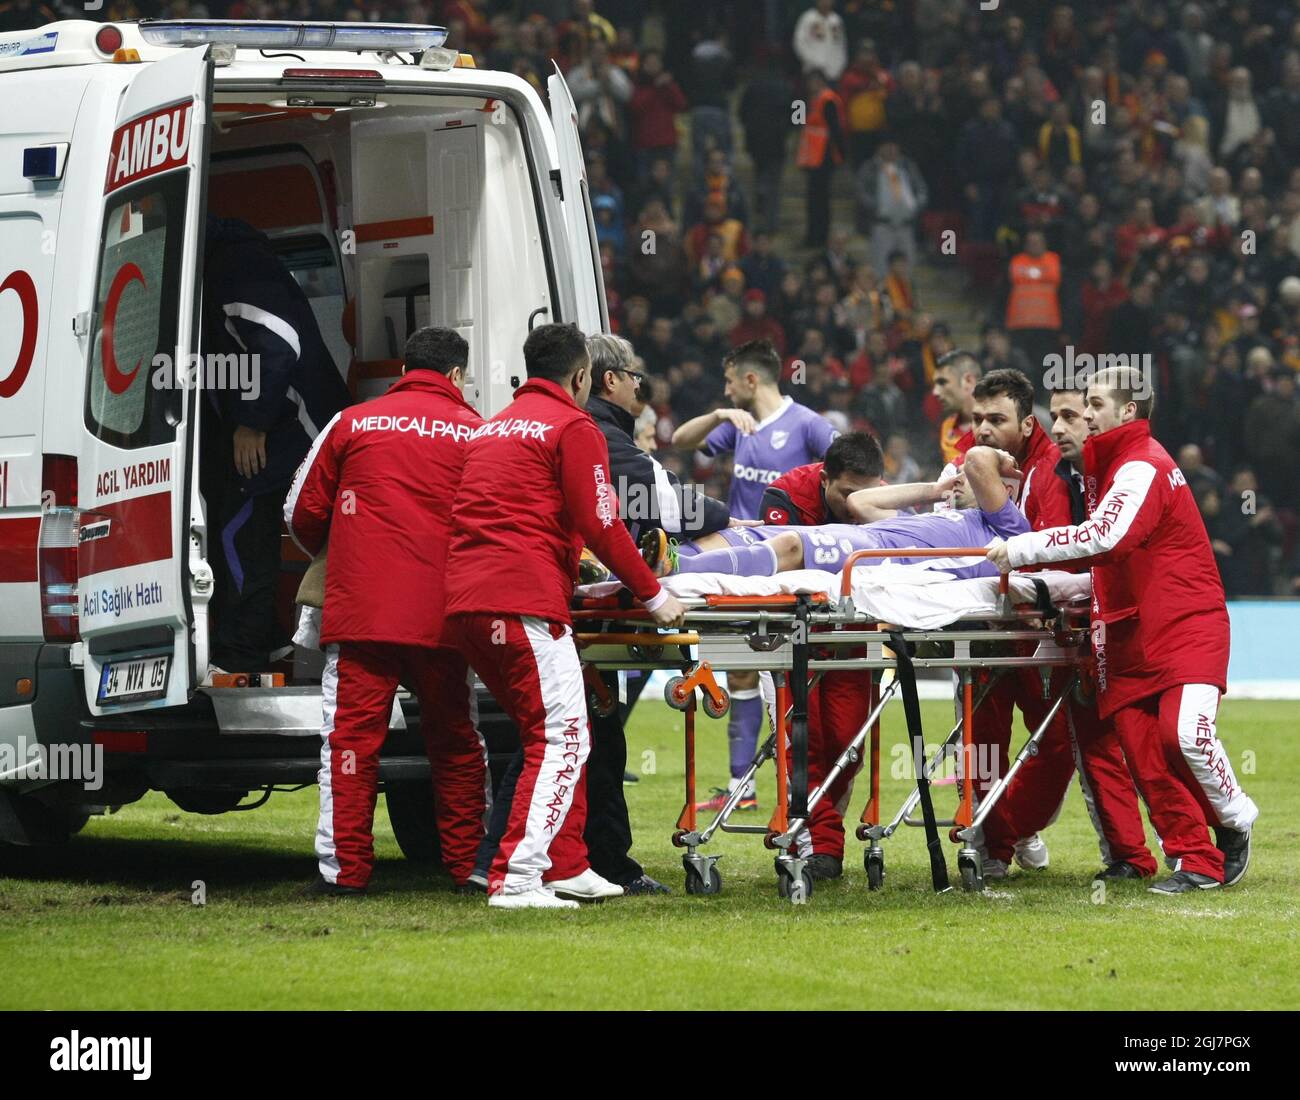 Orduspor's David Barral is stretchered off the field of play and on to a waiting ambulance during their Turkish Superleague soccer match Galatasaray between Orduspor at the AliSamiyen Spor Kompleksi TT arena in Istanbul Turkey. Stock Photo